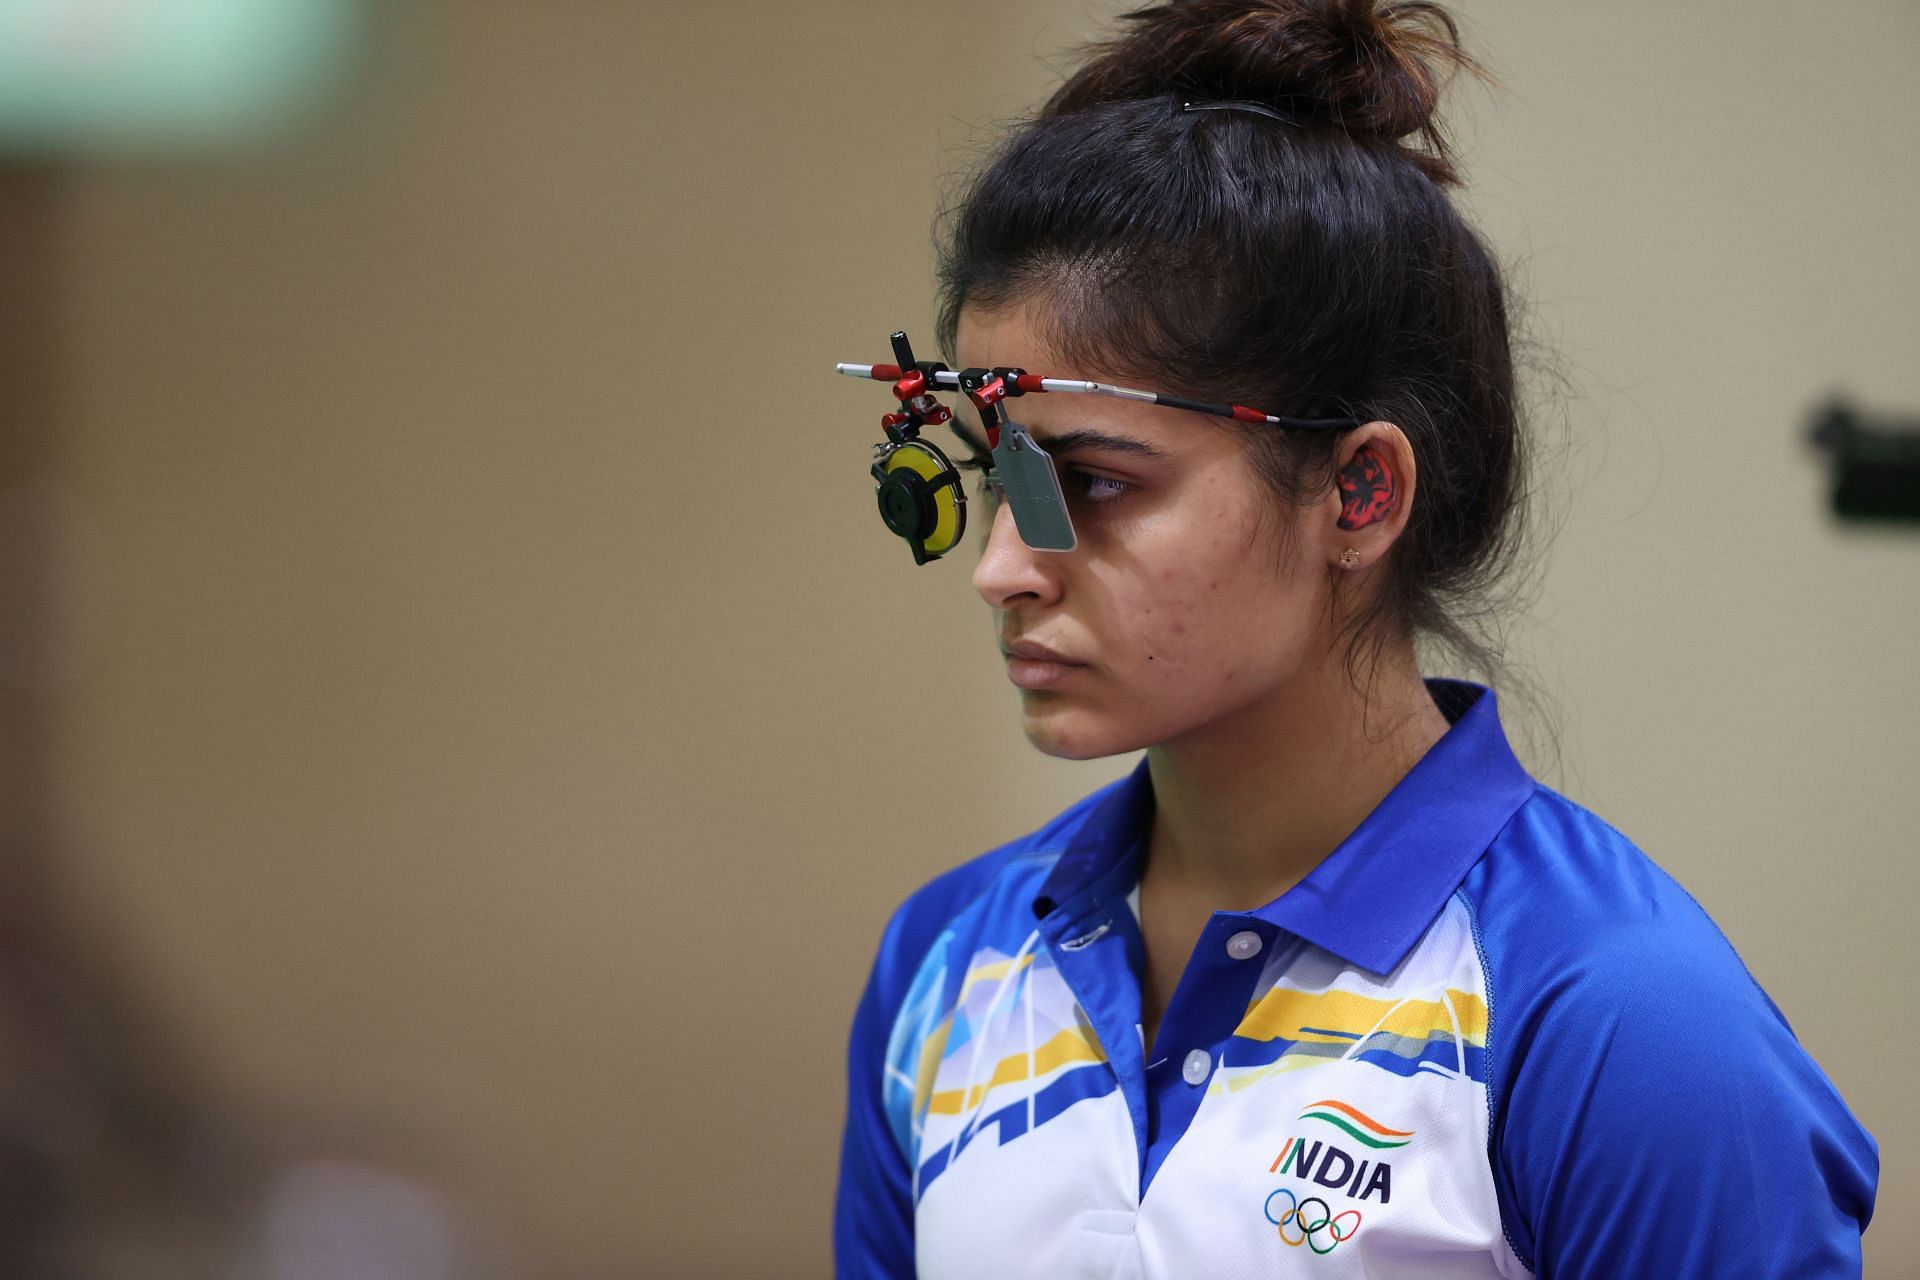 Manu Bhaker took to social media to express disappointment over the non-inclusion of shooting in 2026 Commonwealth Ganes. (PC: Getty Images)